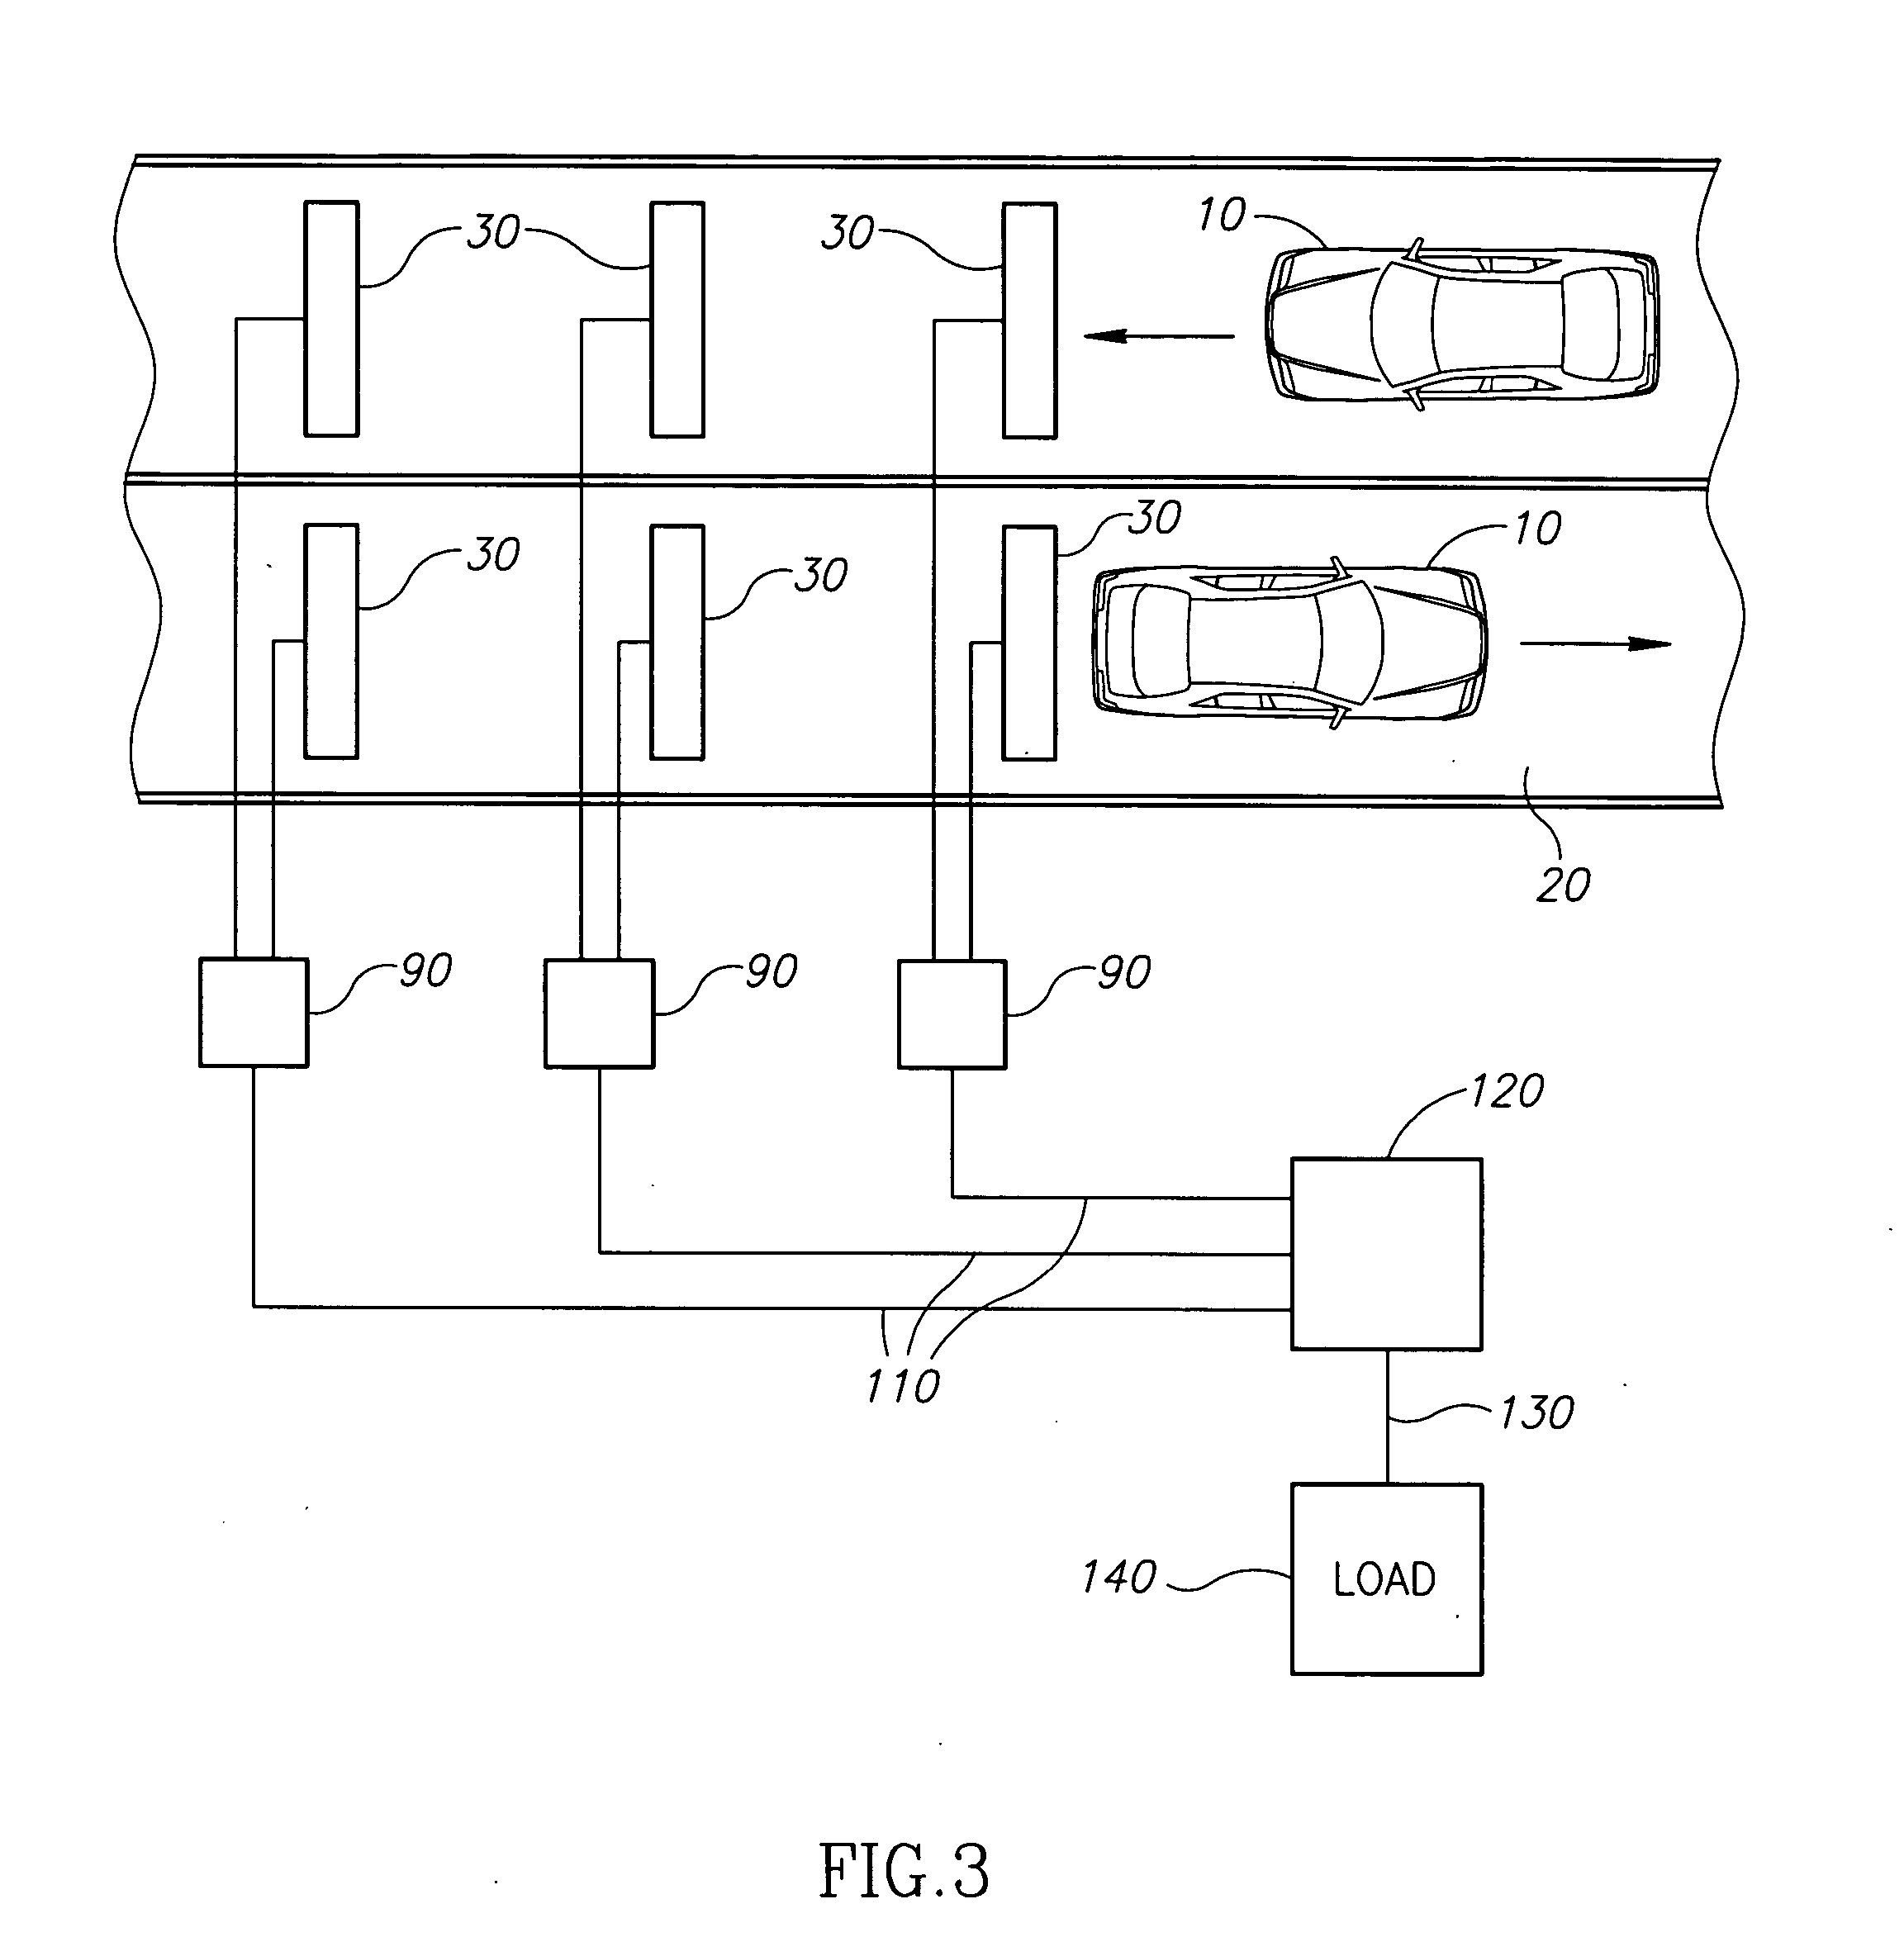 Hydraulic roadbed electricity generating apparatus and method